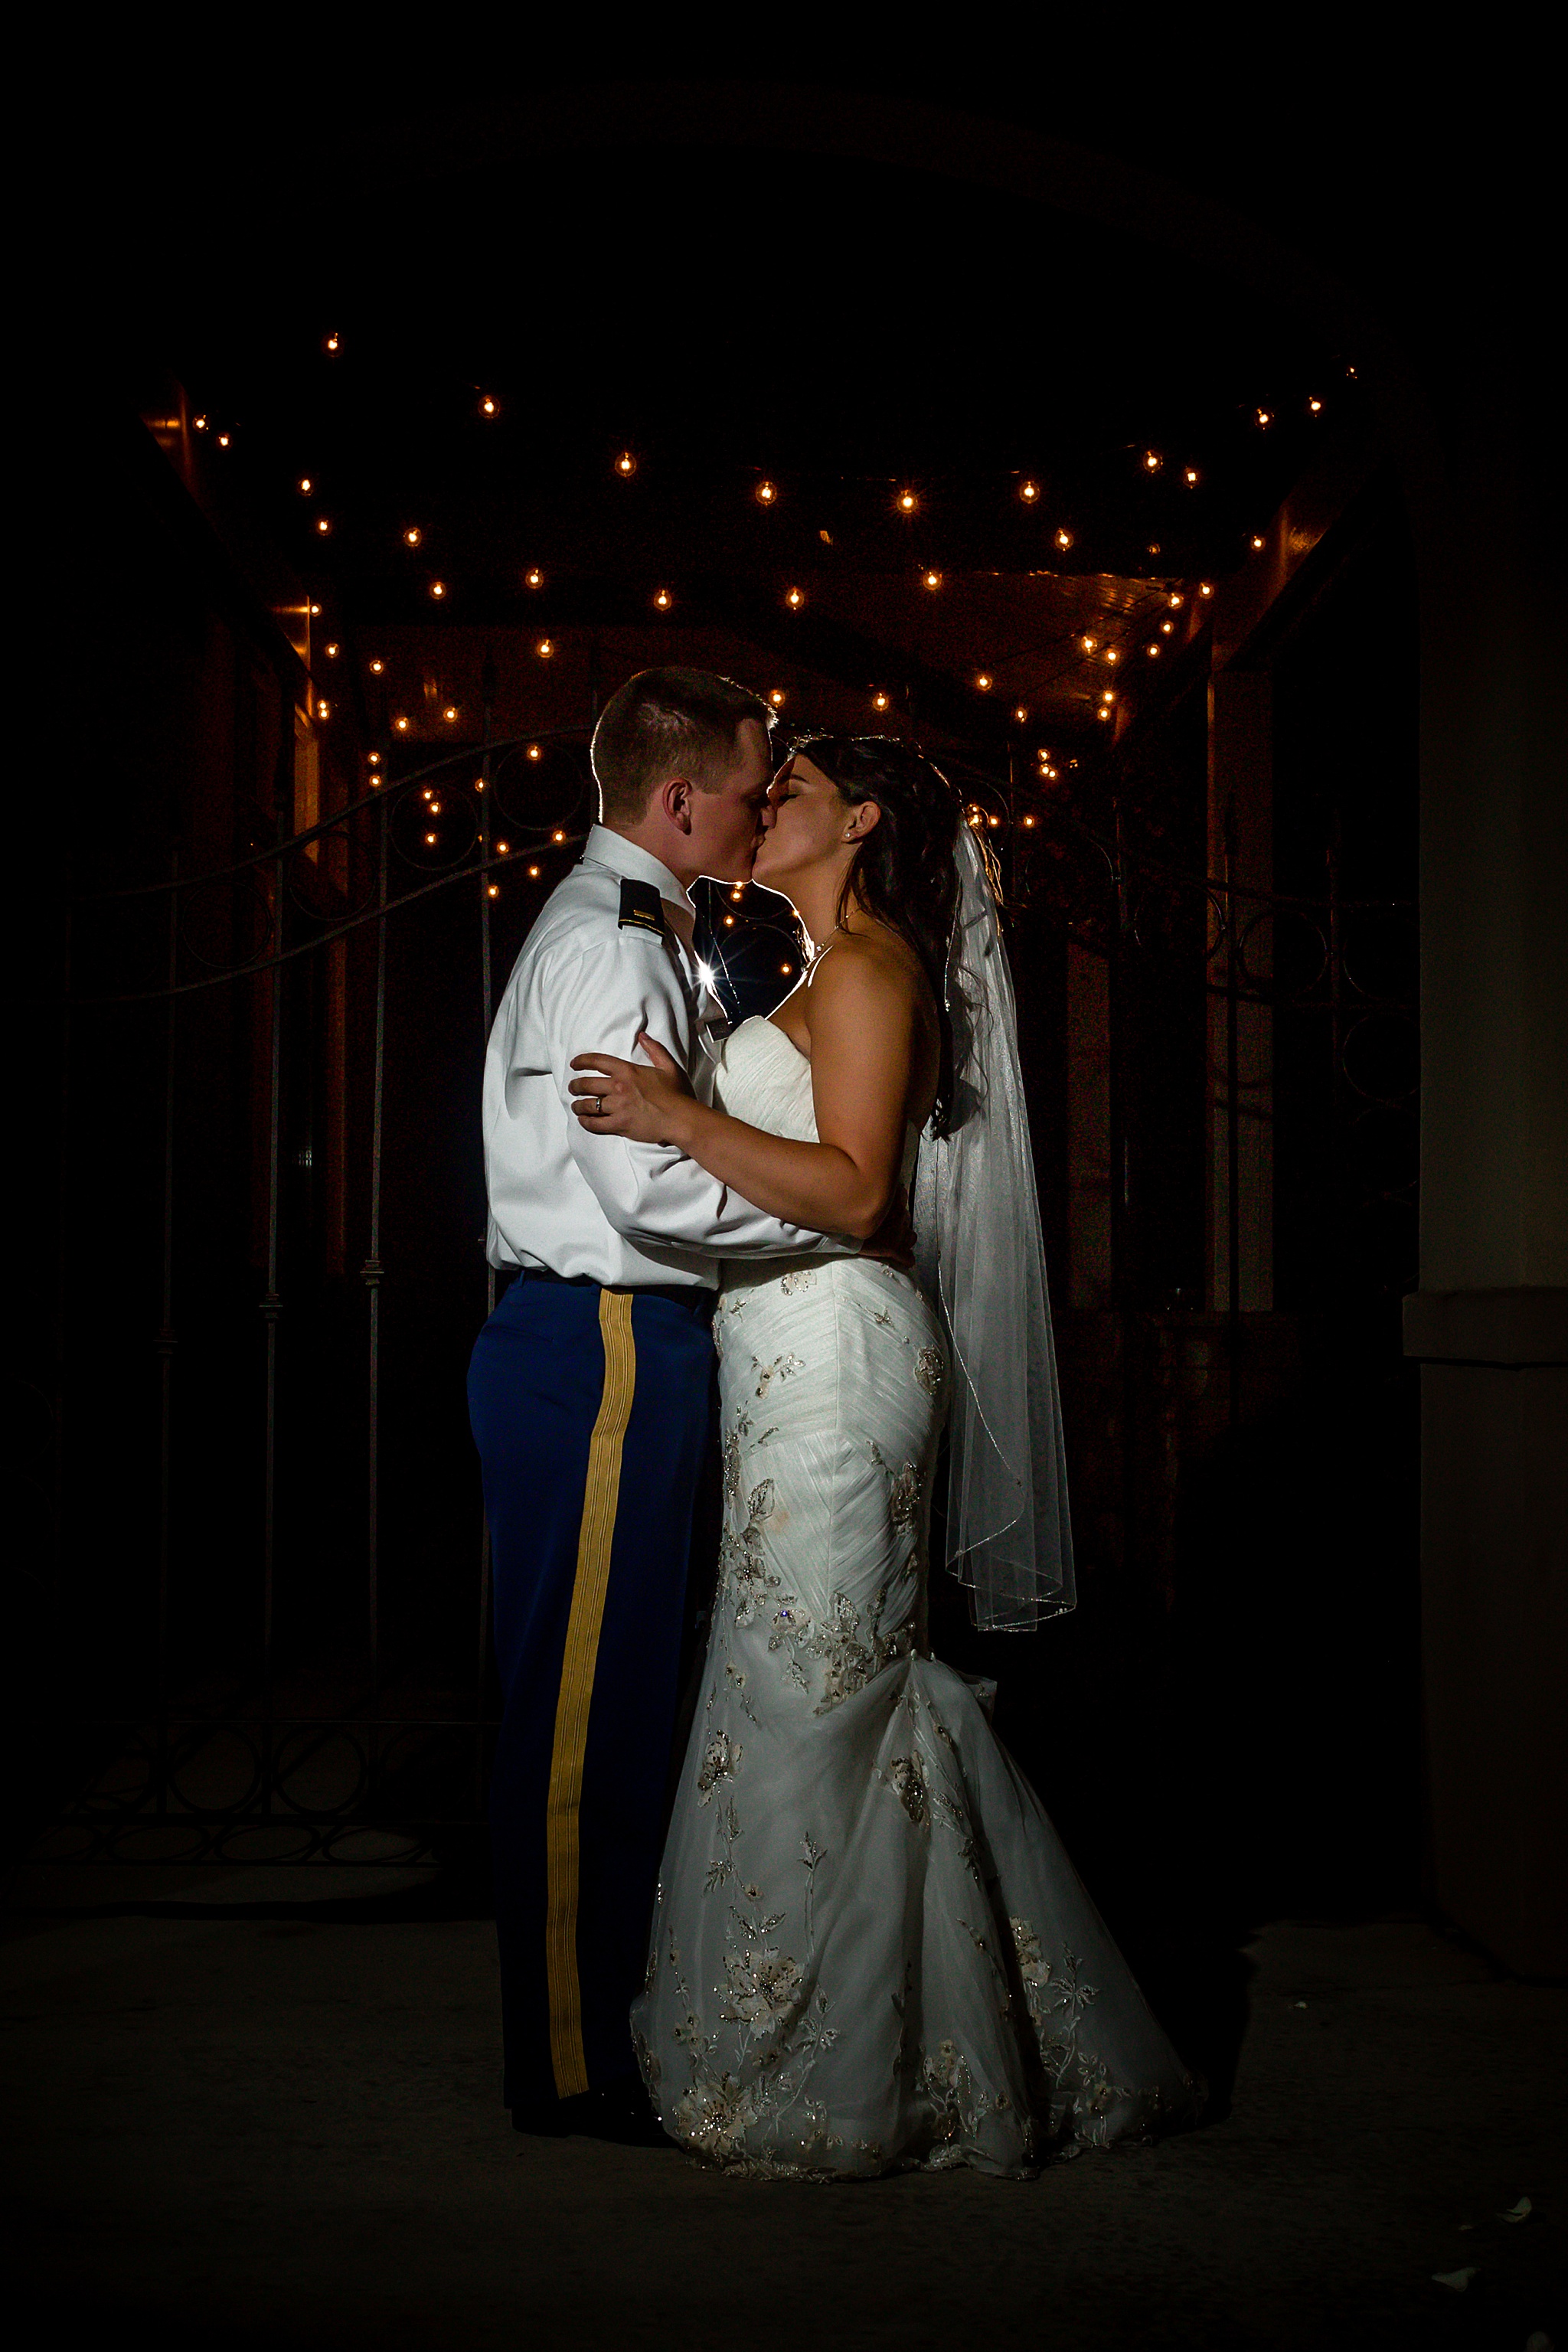 Bride & Groom kissing with string lights in the background. Tania & Chris' Denver Wedding at the Wedgewood Ken Caryl by Colorado Wedding Photography, Jennifer Garza. Colorado Wedding Photographer, Colorado Wedding Photography, Denver Wedding Photographer, Denver Wedding Photography, US Marine Corp Wedding, US Marine Corp, Military Wedding, US Marines, Wedgewood Weddings, Wedgewood Weddings Ken Caryl, Colorado Wedding, Denver Wedding, Wedding Photographer, Colorado Bride, Brides of Colorado